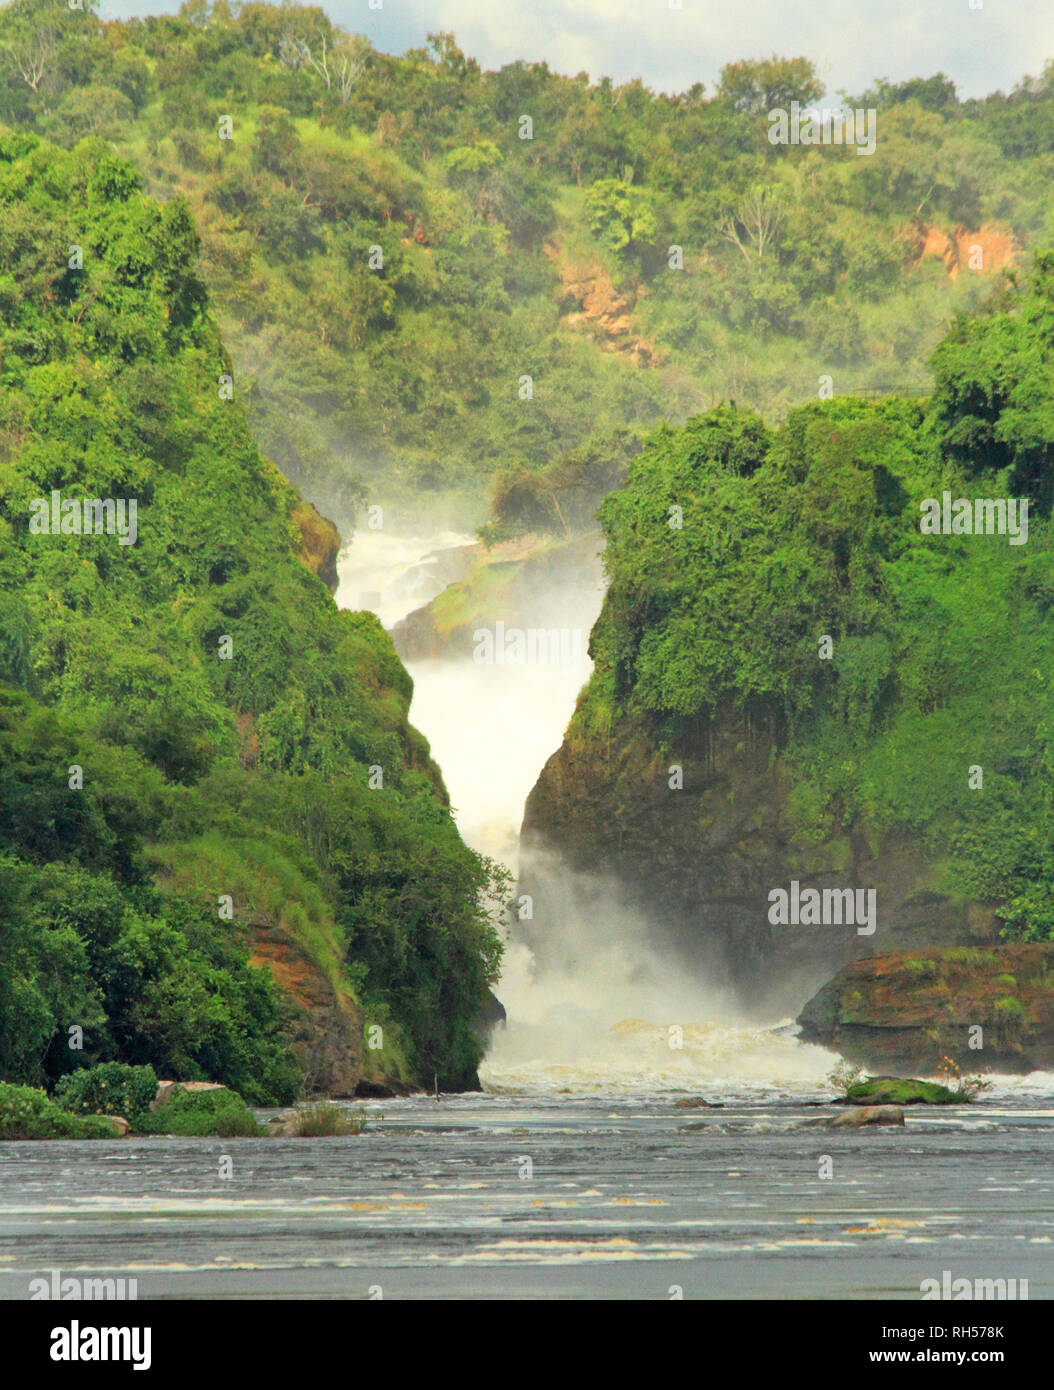 Looking towards Murchison Falls from the middle of the Nile River in Uganda Stock Photo